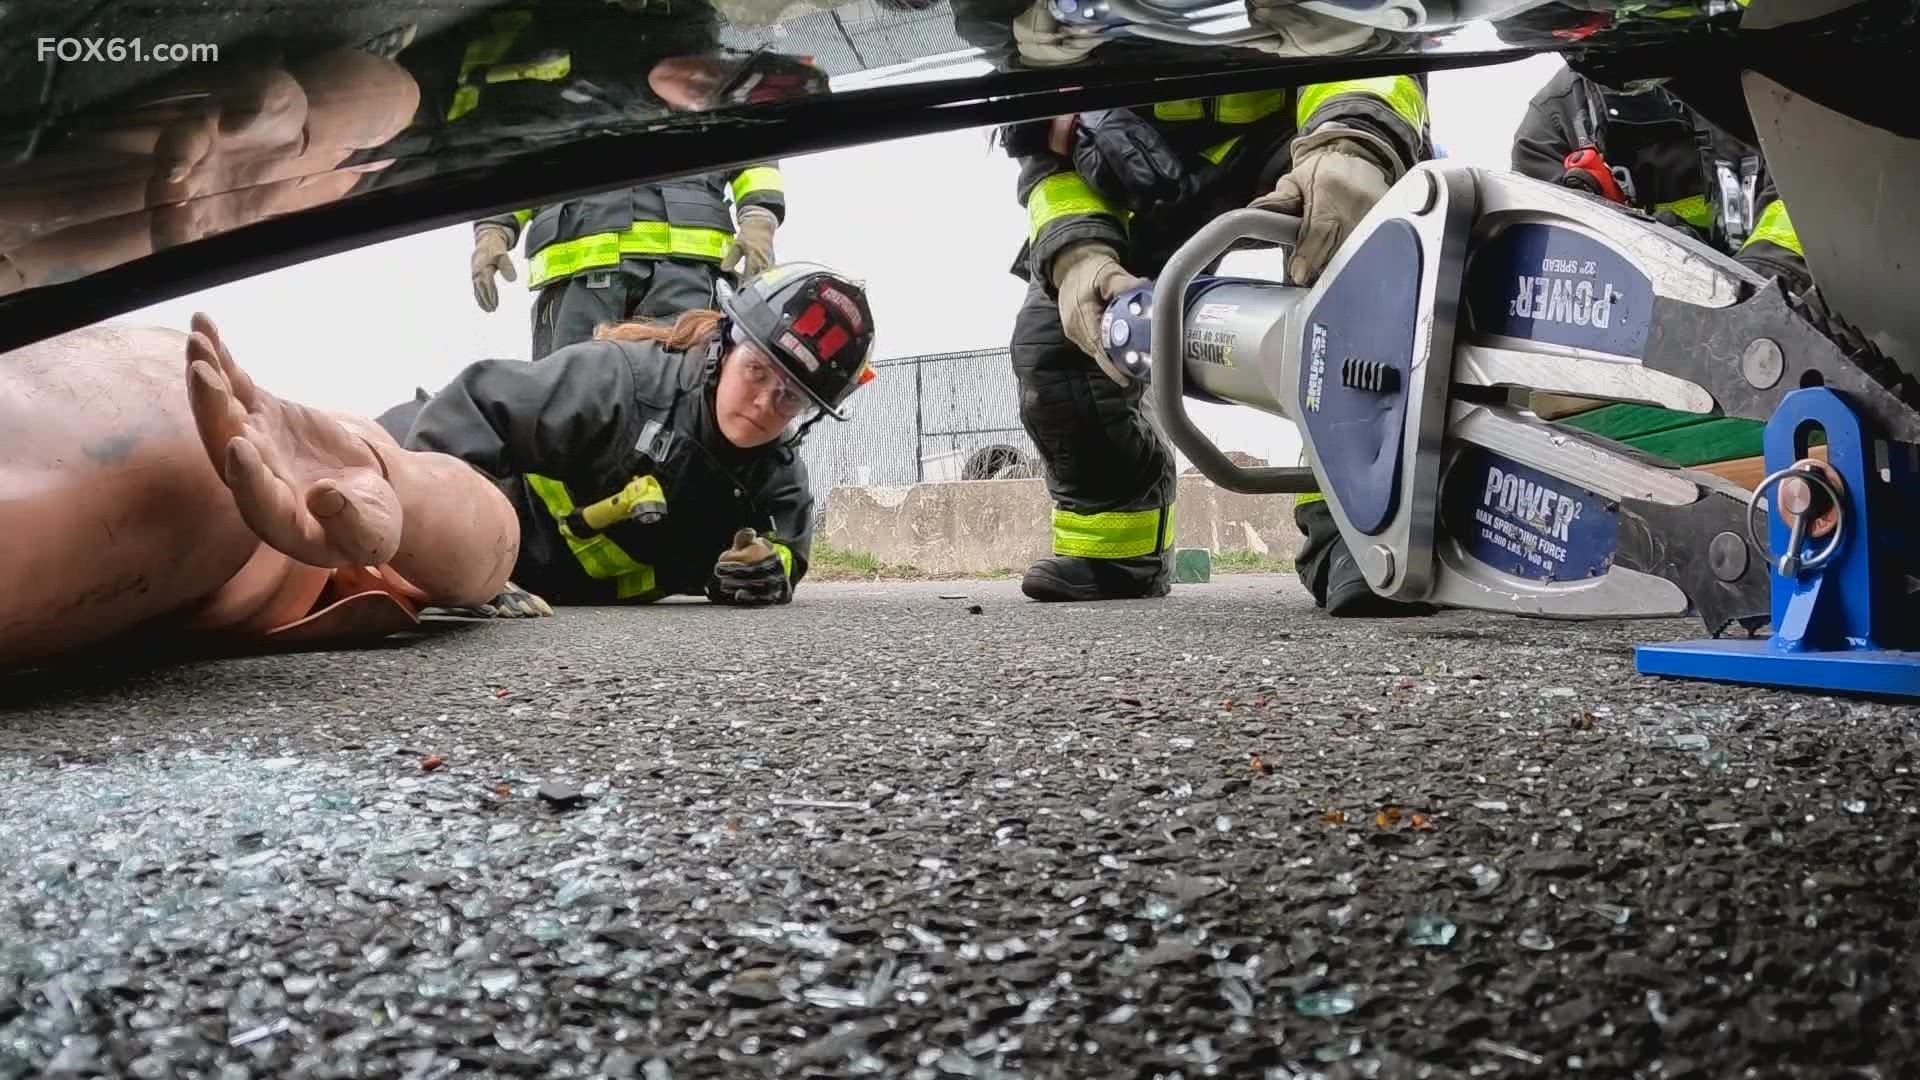 The TL9 Stabilizer gives fire fighters a much needed lift.